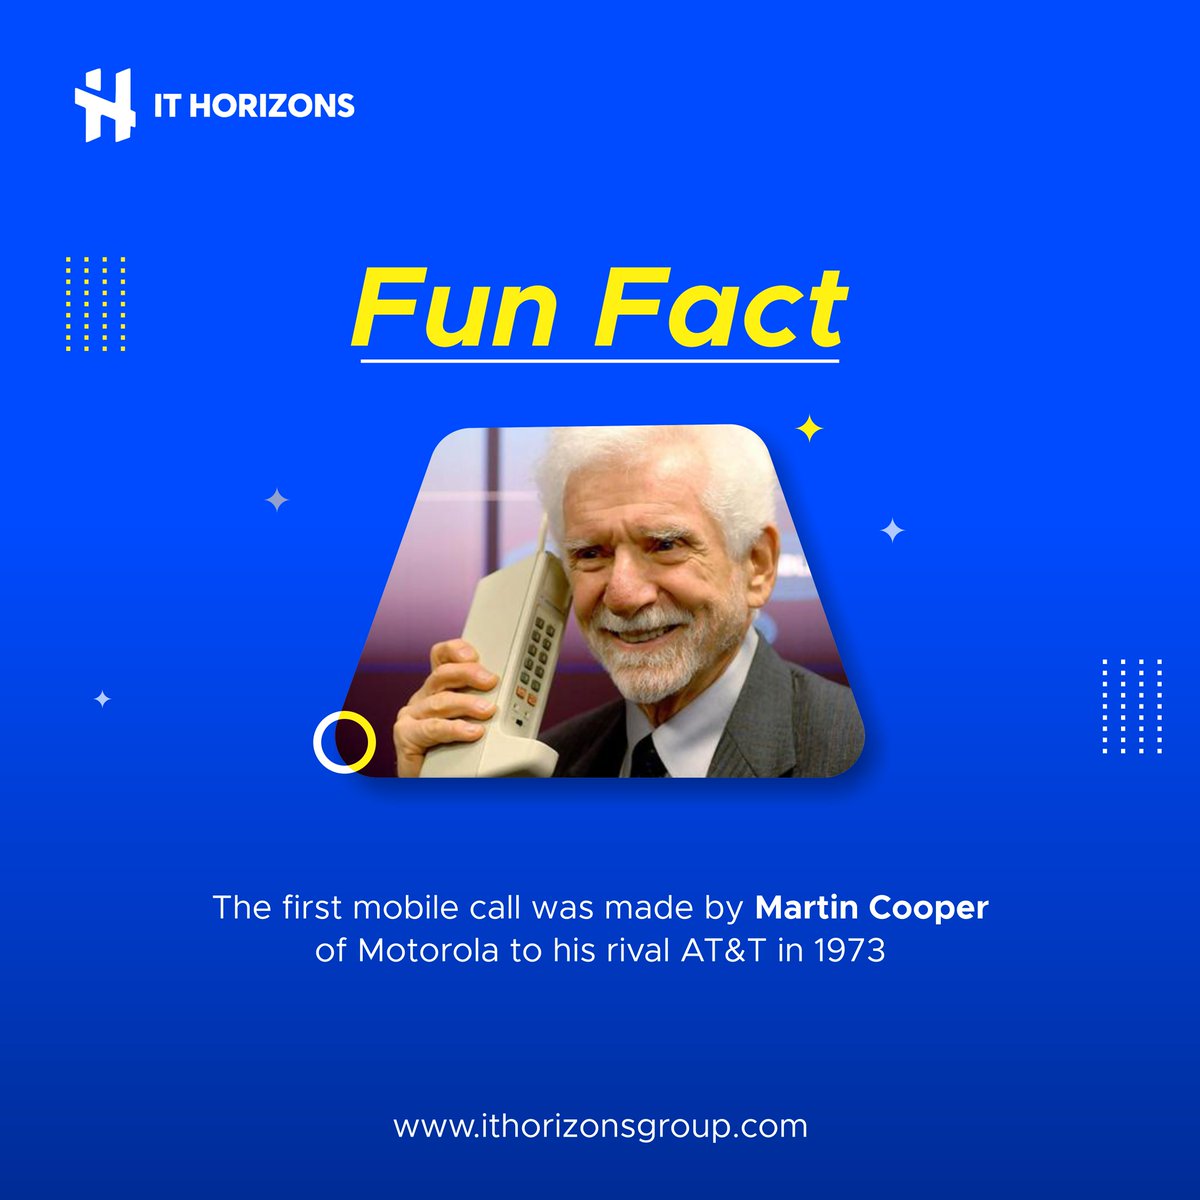 #Didyouknow? The first mobile phone call was made by Martin Cooper of Motorola on April 3, 1973. He dialed his rival at AT&T and famously said, I'm calling you from a cellphone, a real handheld portable cellphone.' And just like that, the #mobilerevolution took off! #ITHorizons